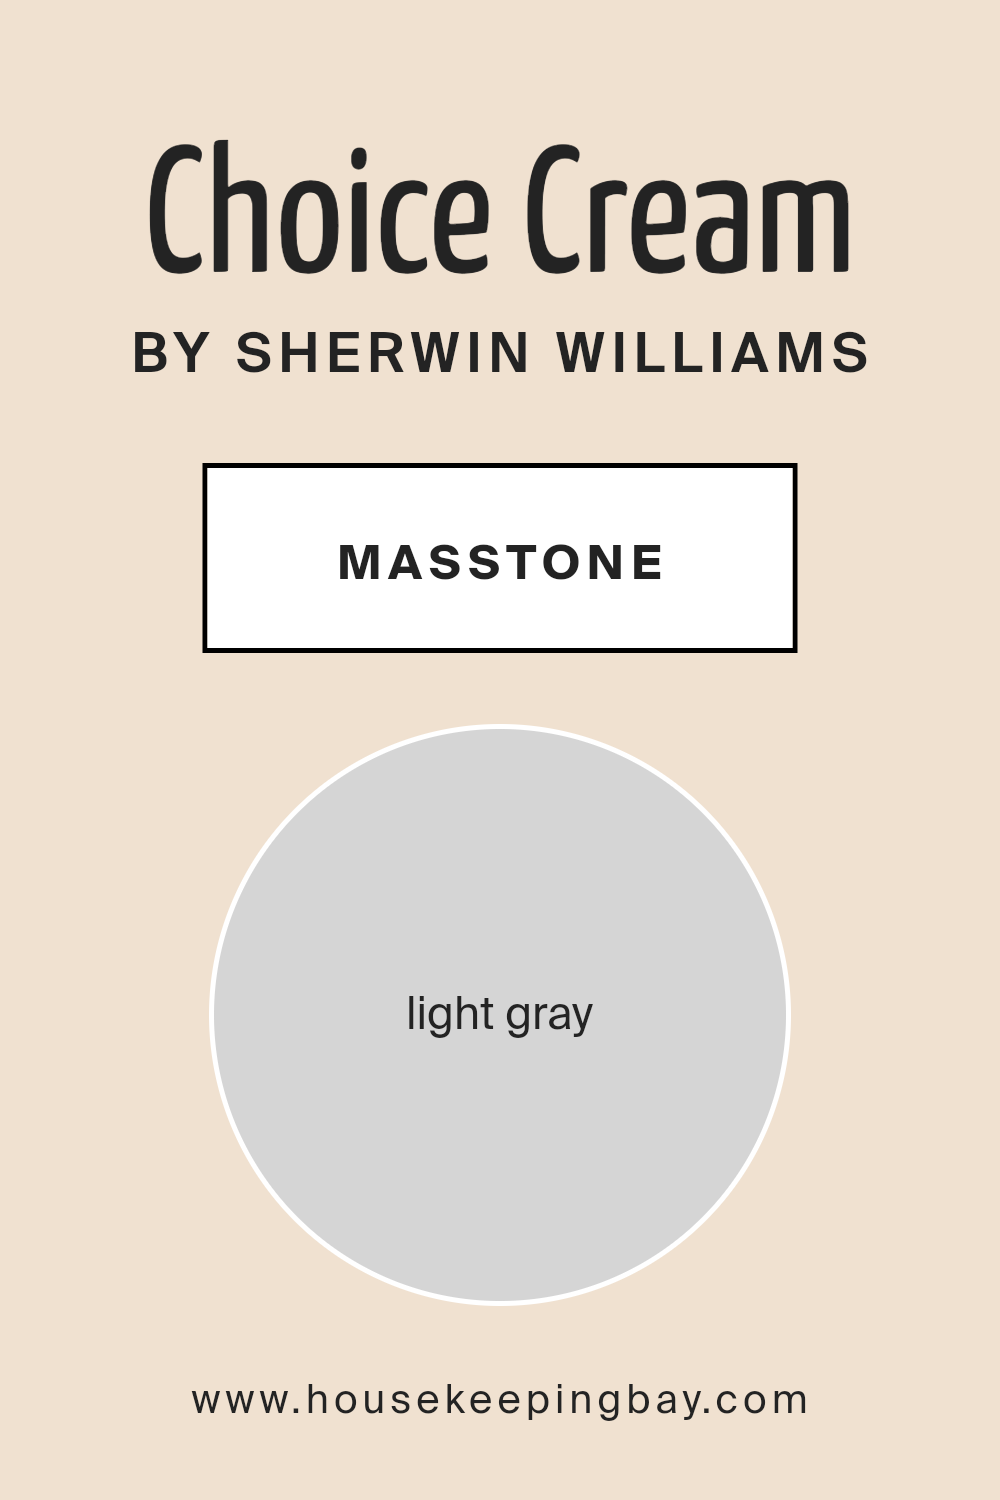 what_is_the_masstone_of_choice_cream_sw_6357